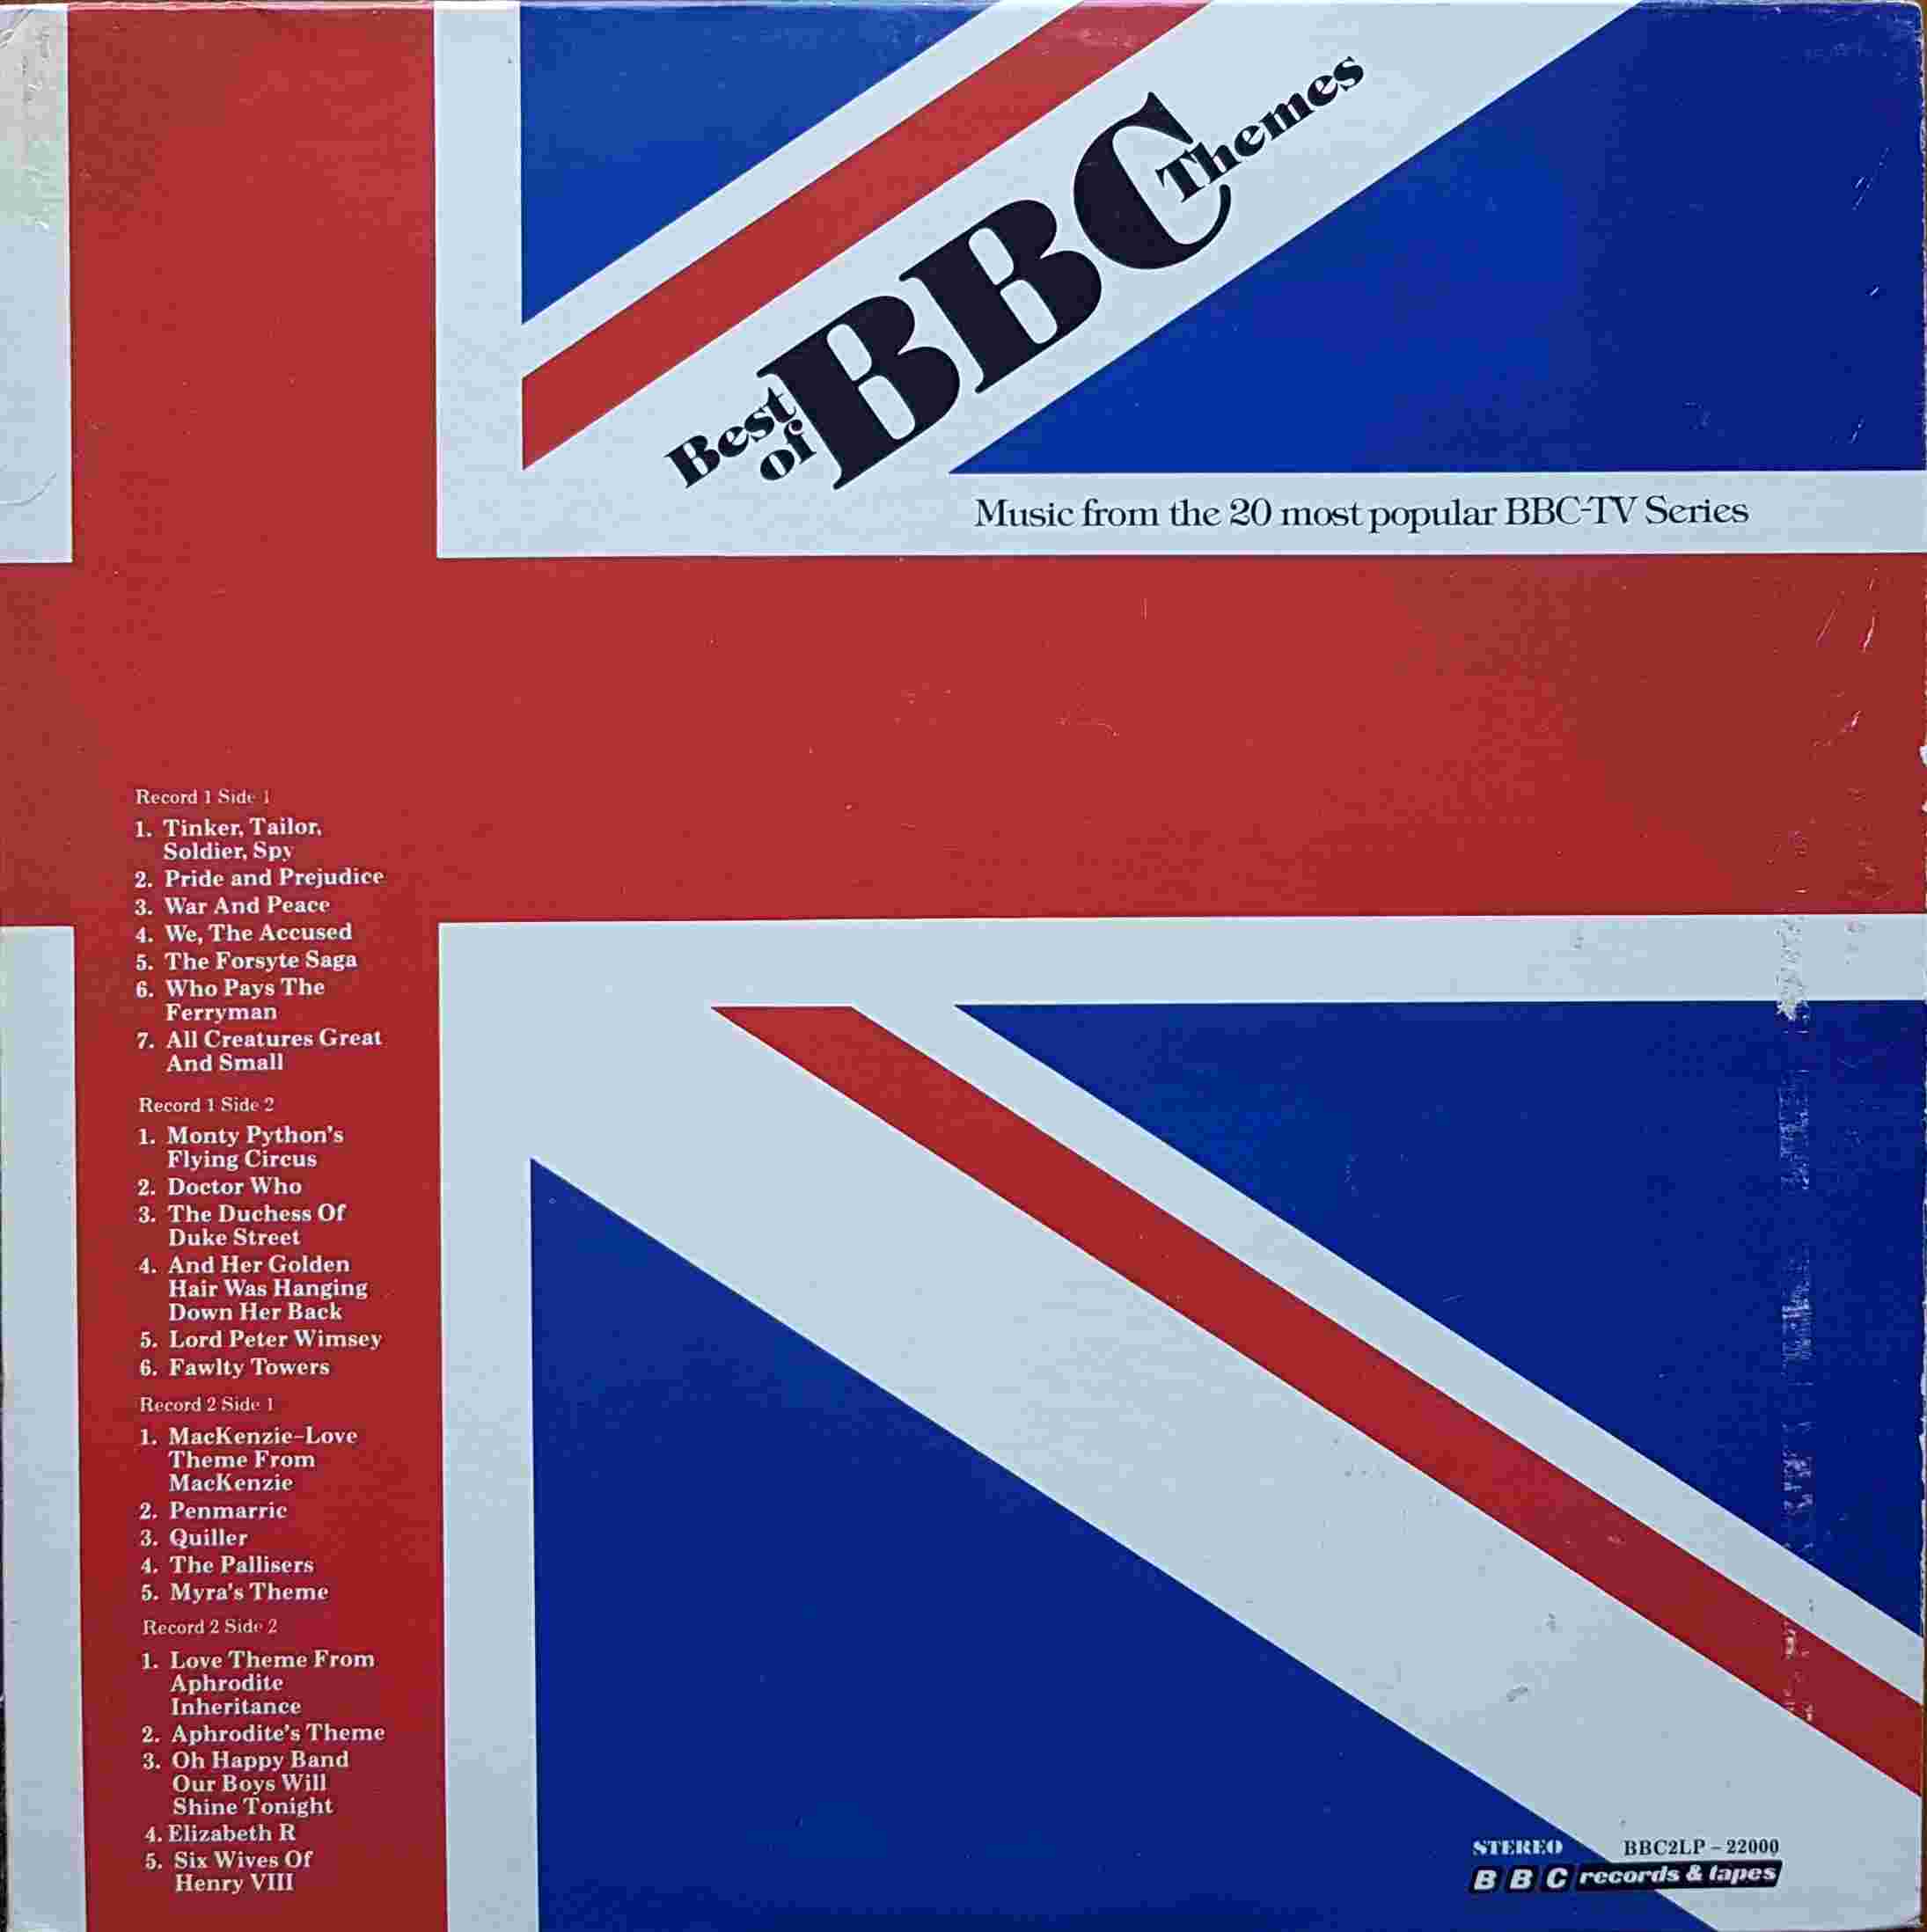 Picture of BBC2LP-22000 Music from the 20 most popular BBC TV series (US import) by artist Various from the BBC albums - Records and Tapes library